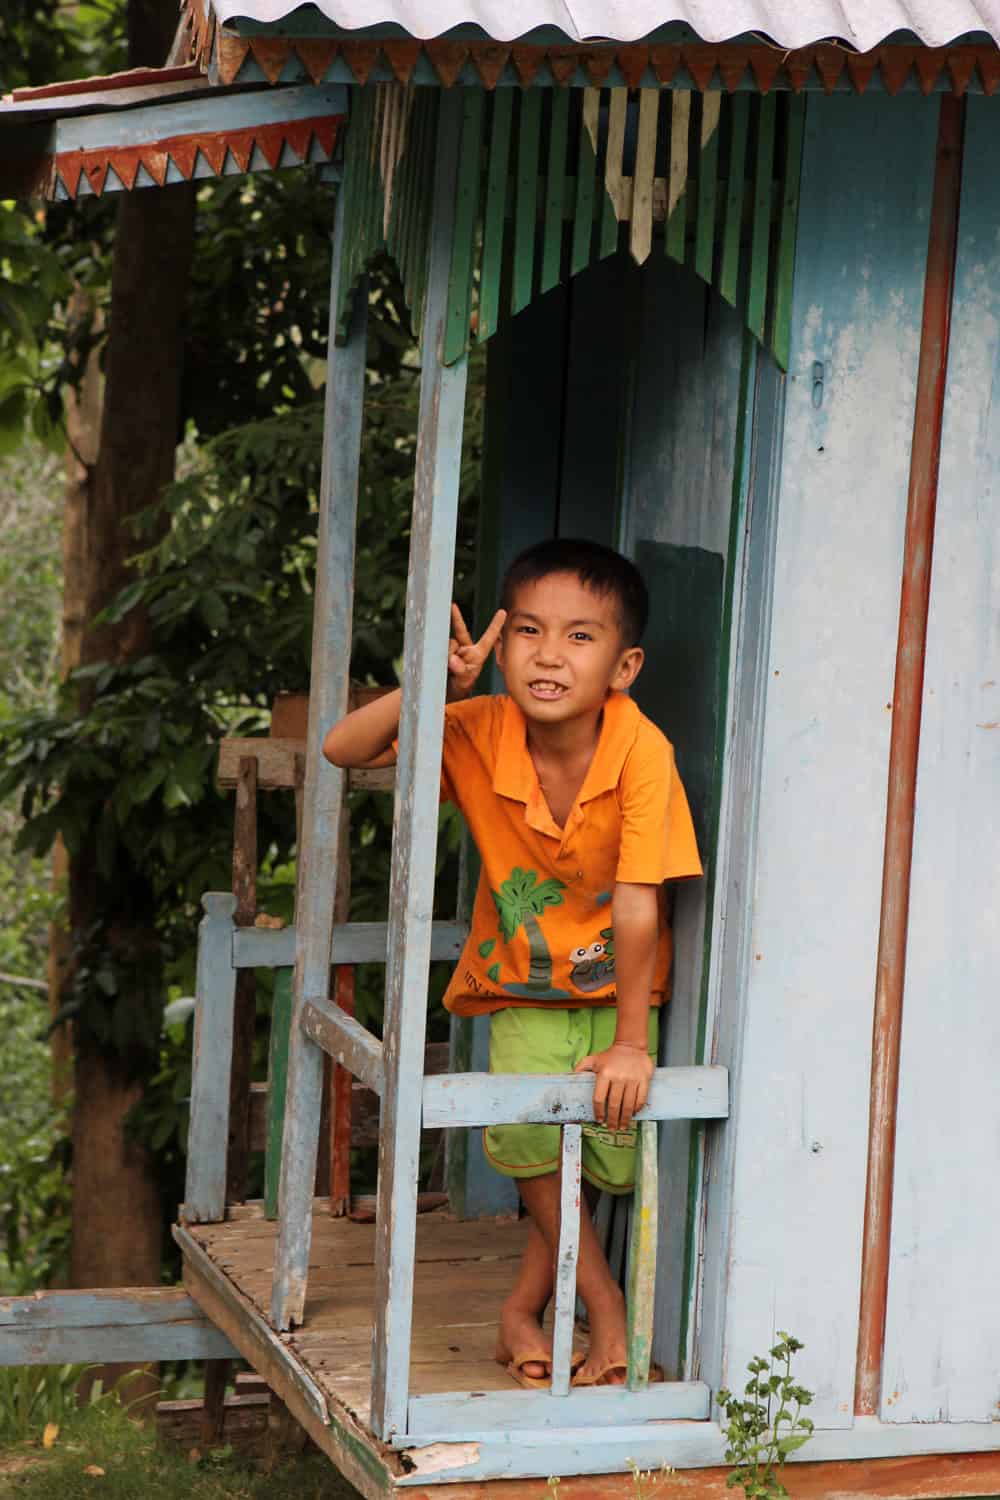 Smiles in a village in Laos